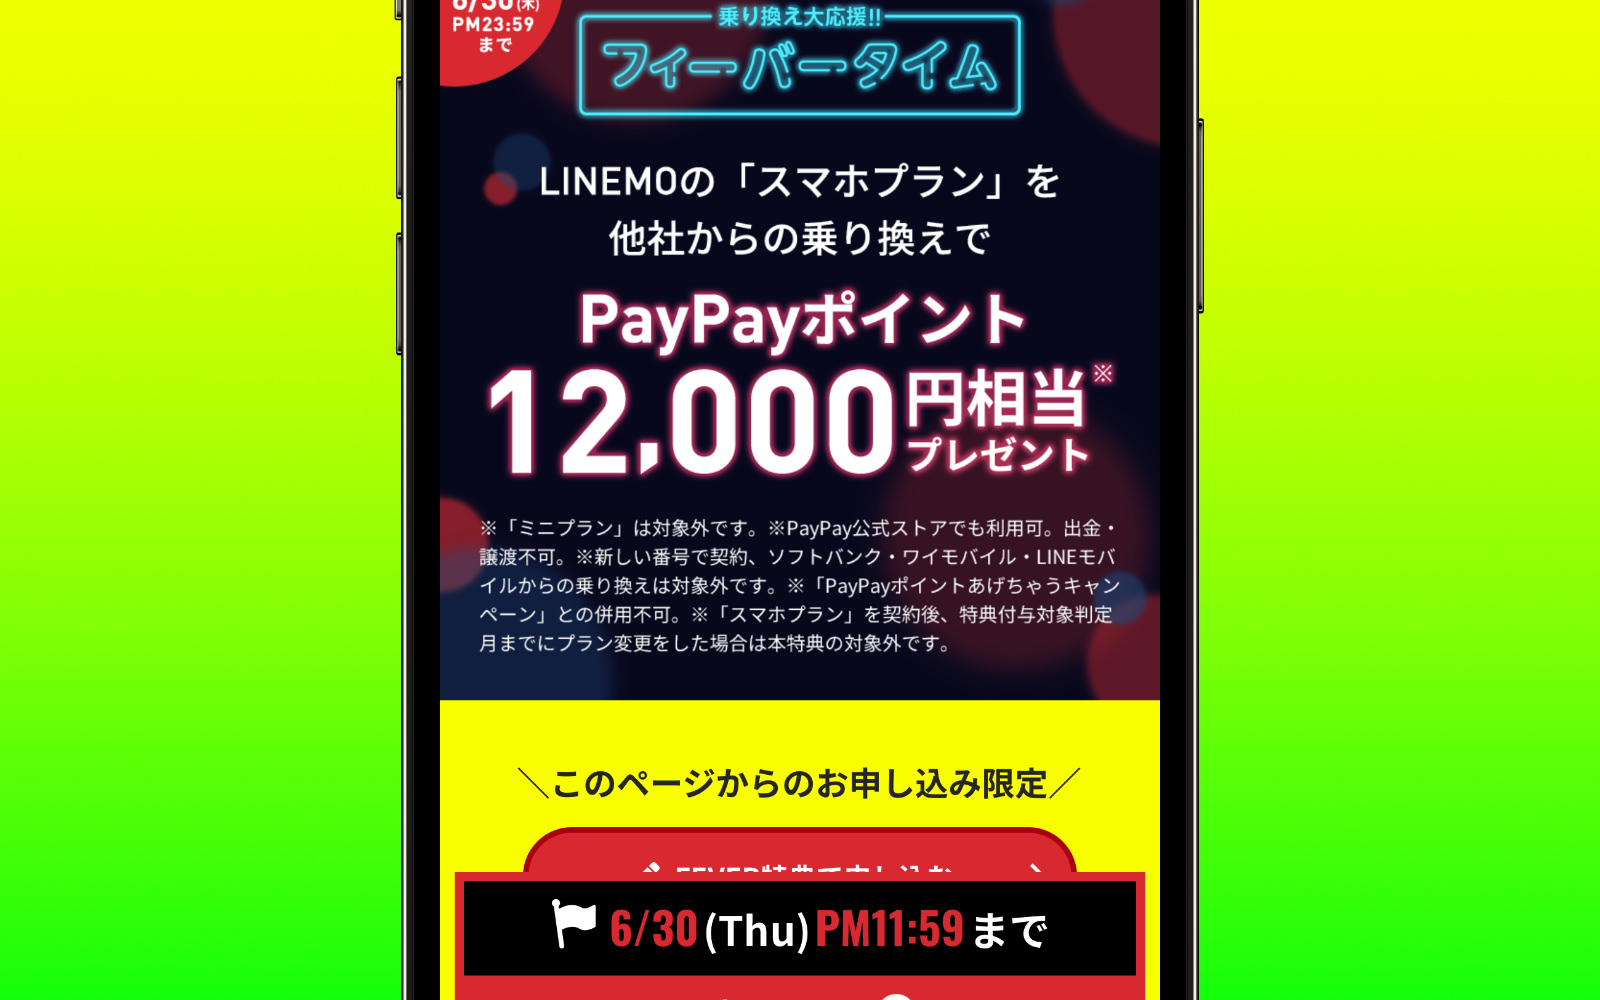 LINEMO Fever Time PayPayPoint